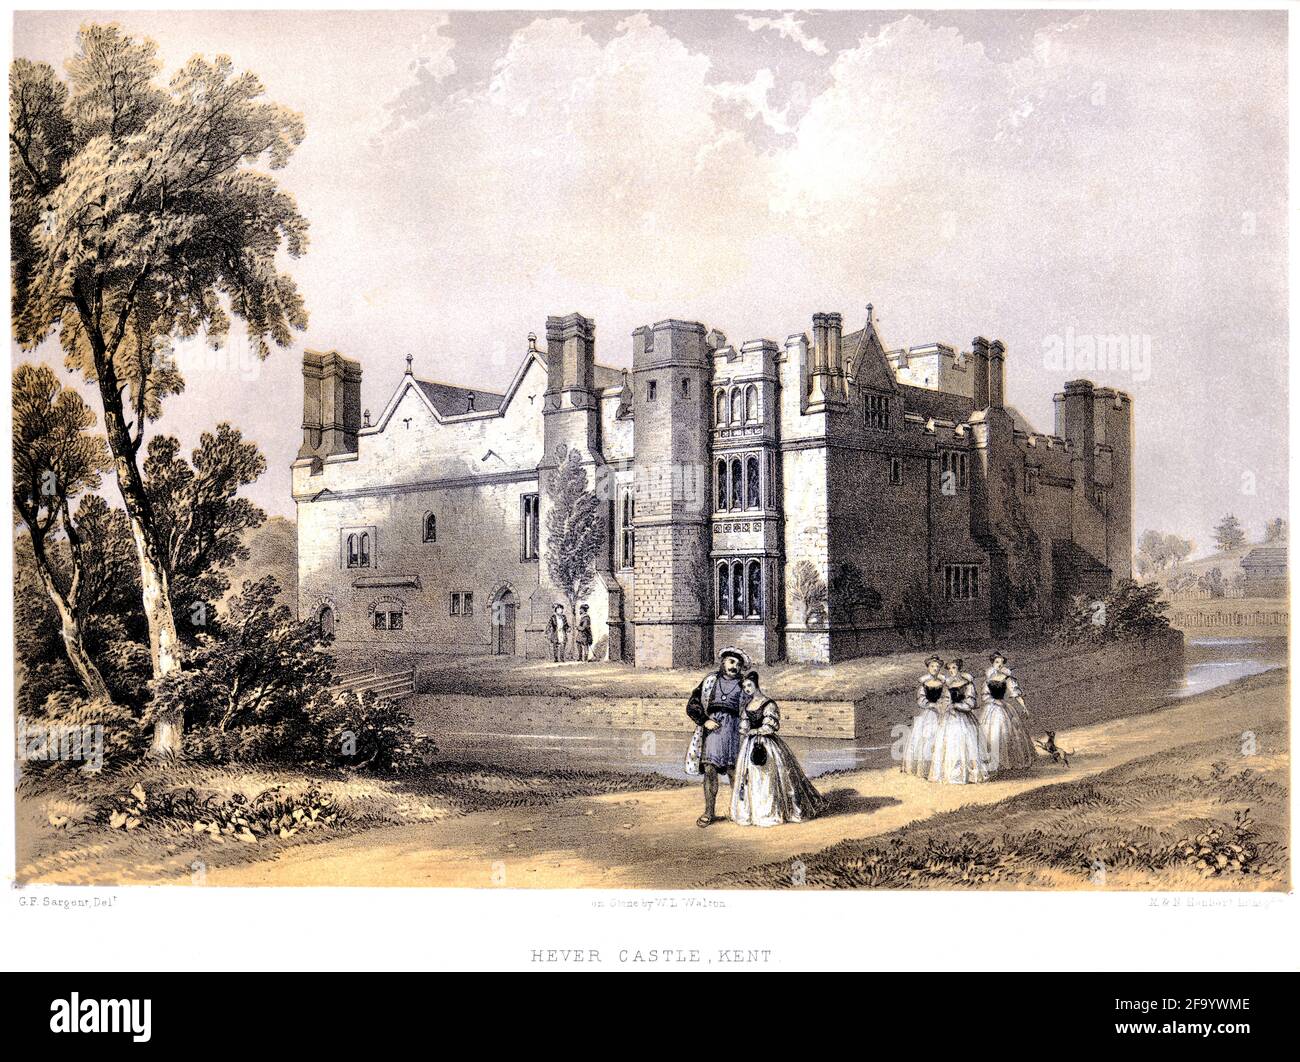 A lithotint of Hever Castle, Kent UK scanned at high resolution from a book printed in 1858. Believed copyright free. Stock Photo